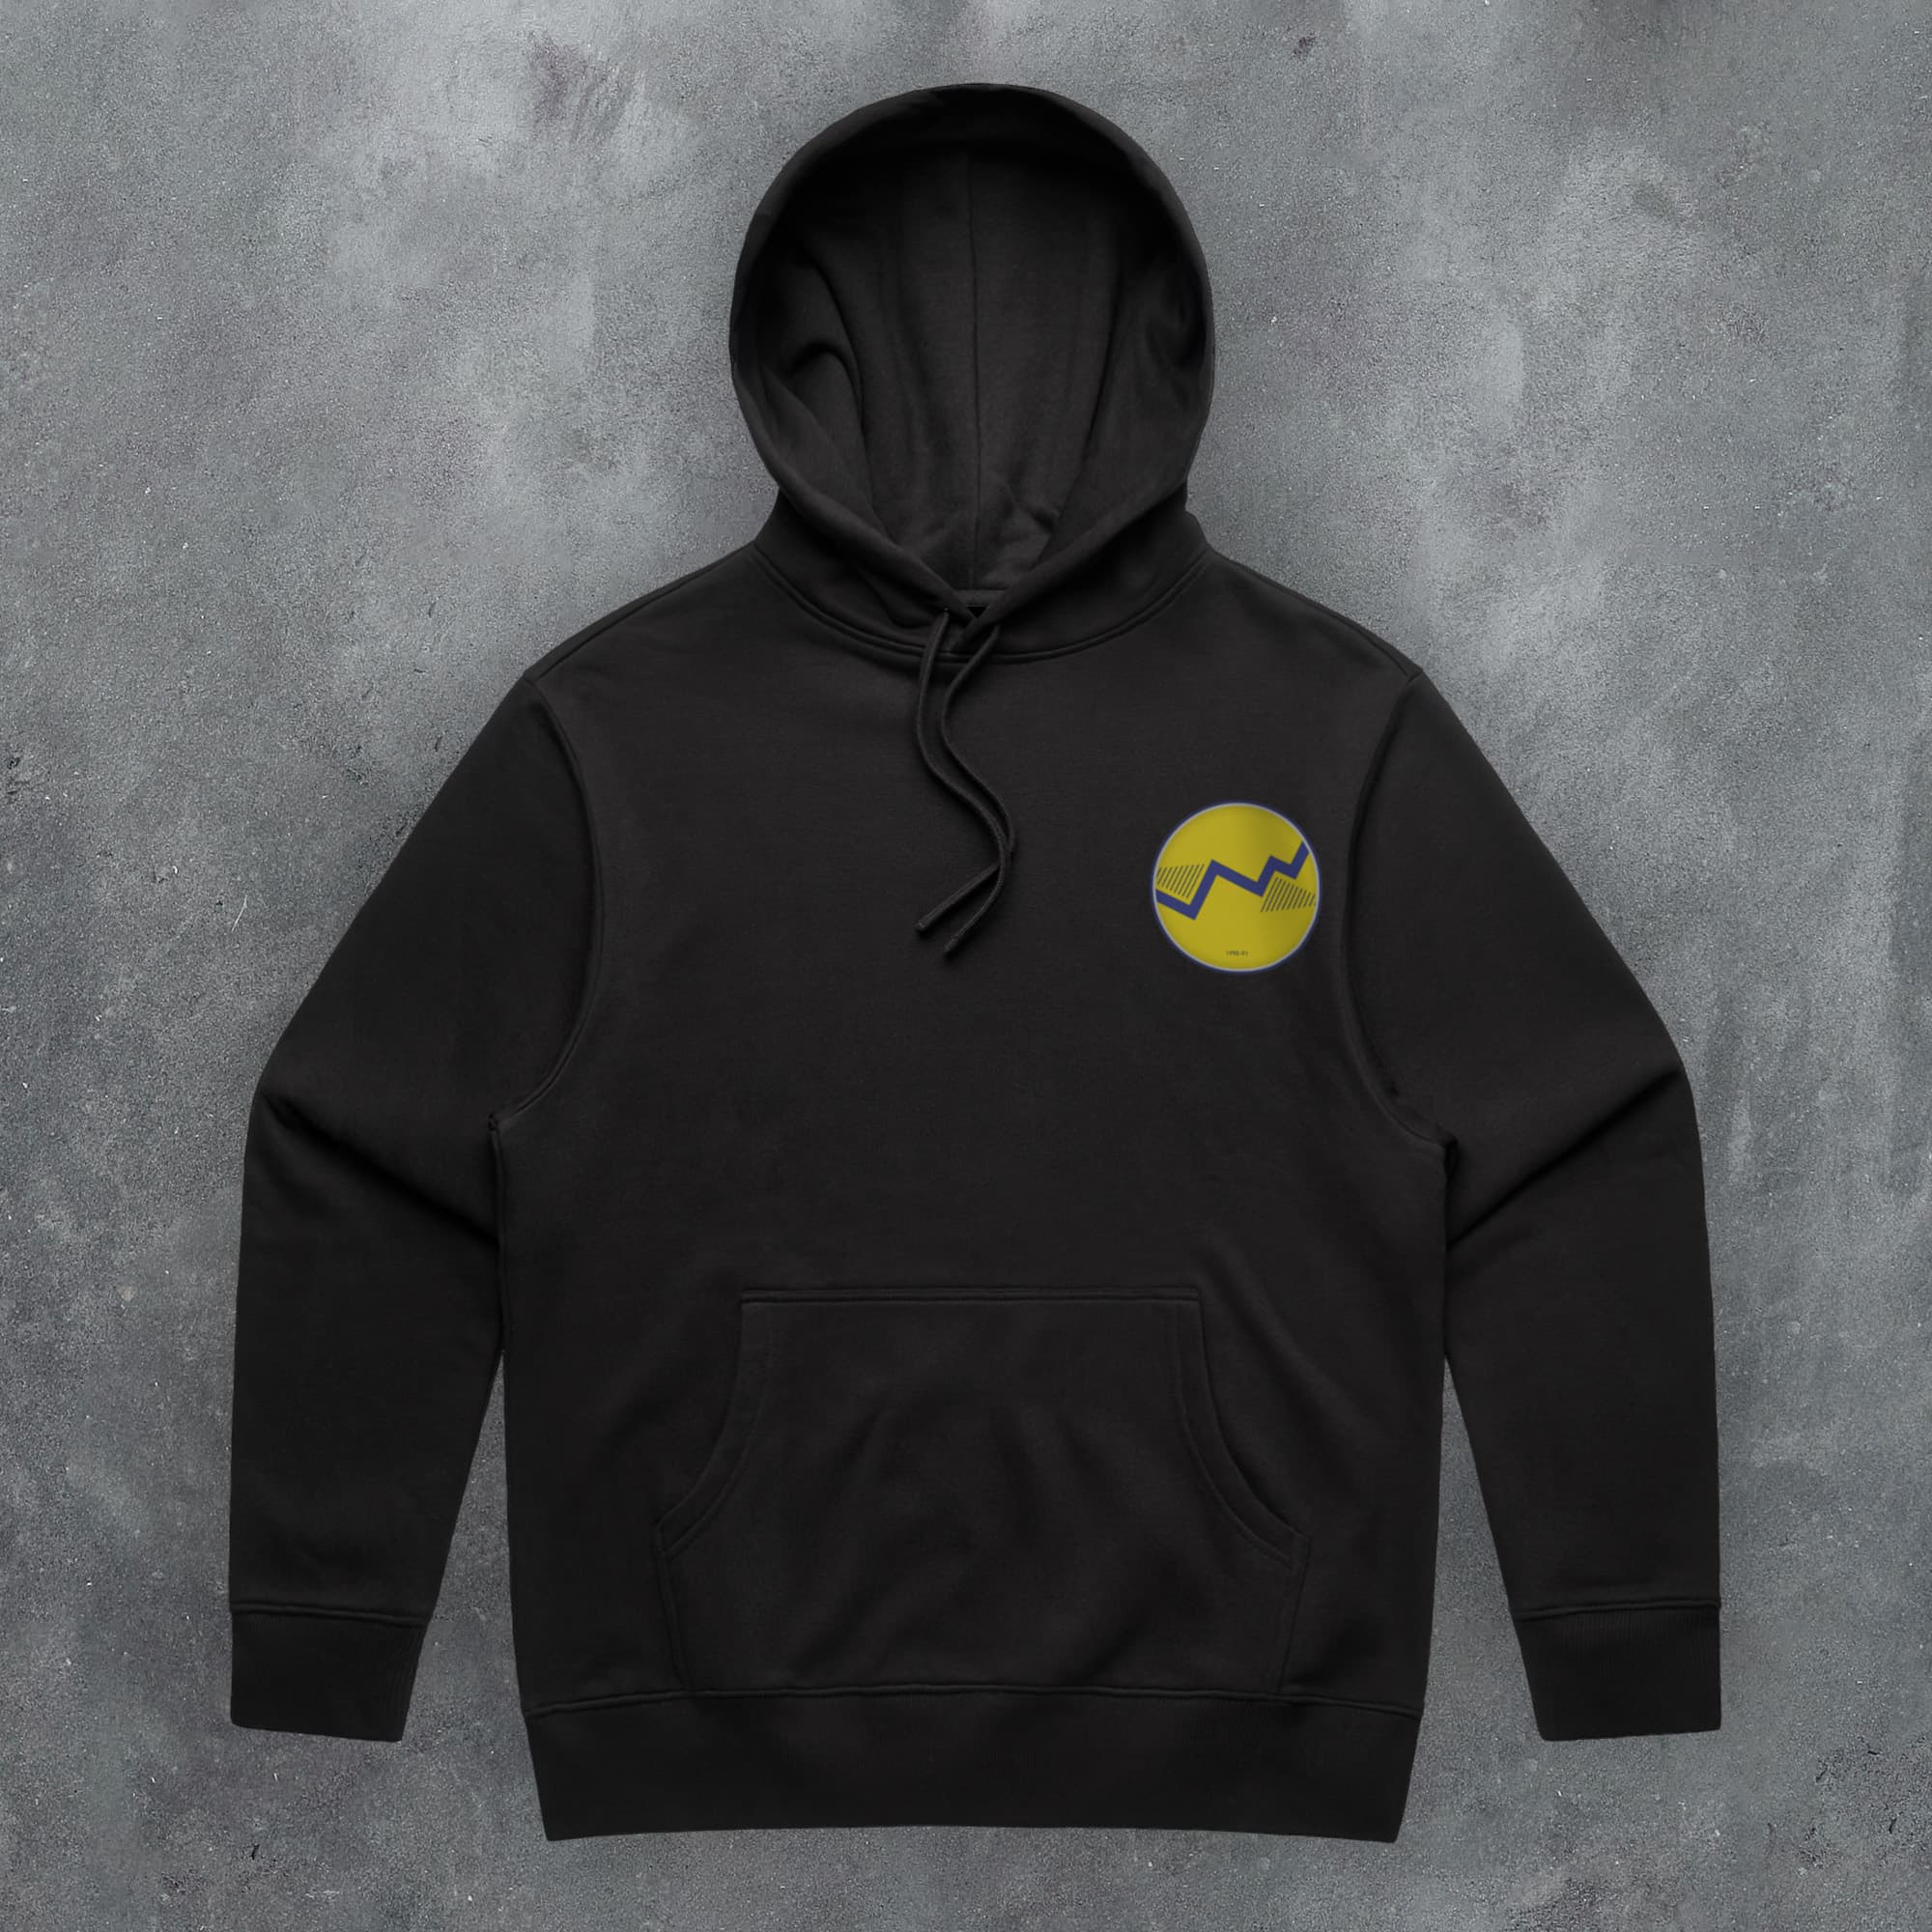 a black hoodie with a smiley face on it